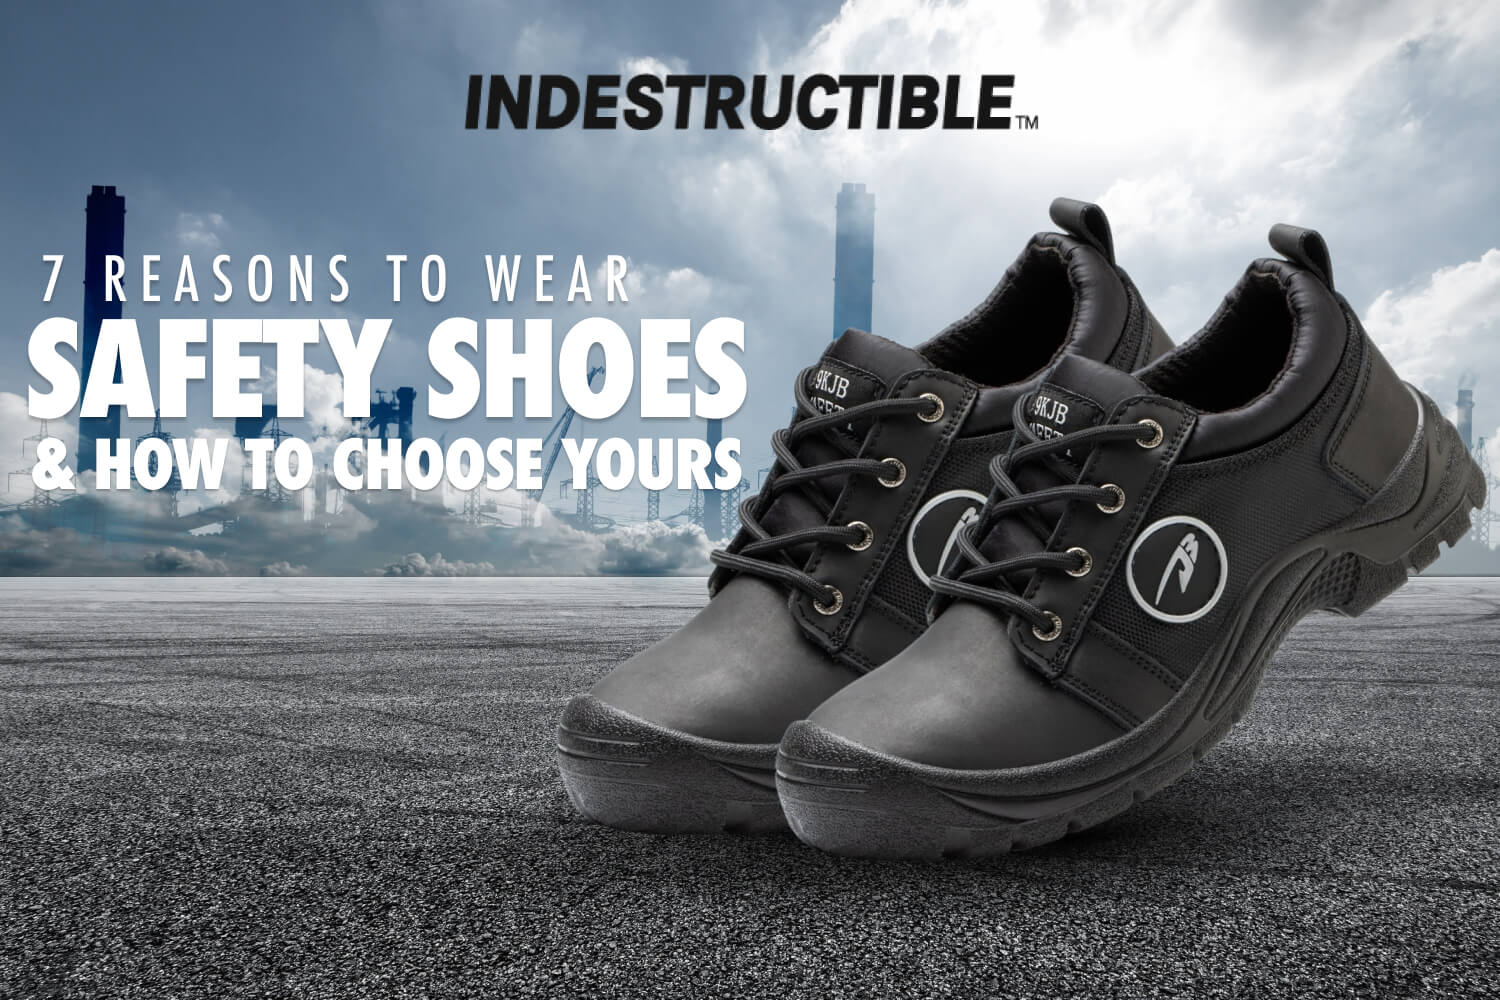 Blog: 5 reasons to wear safety shoes across all industries